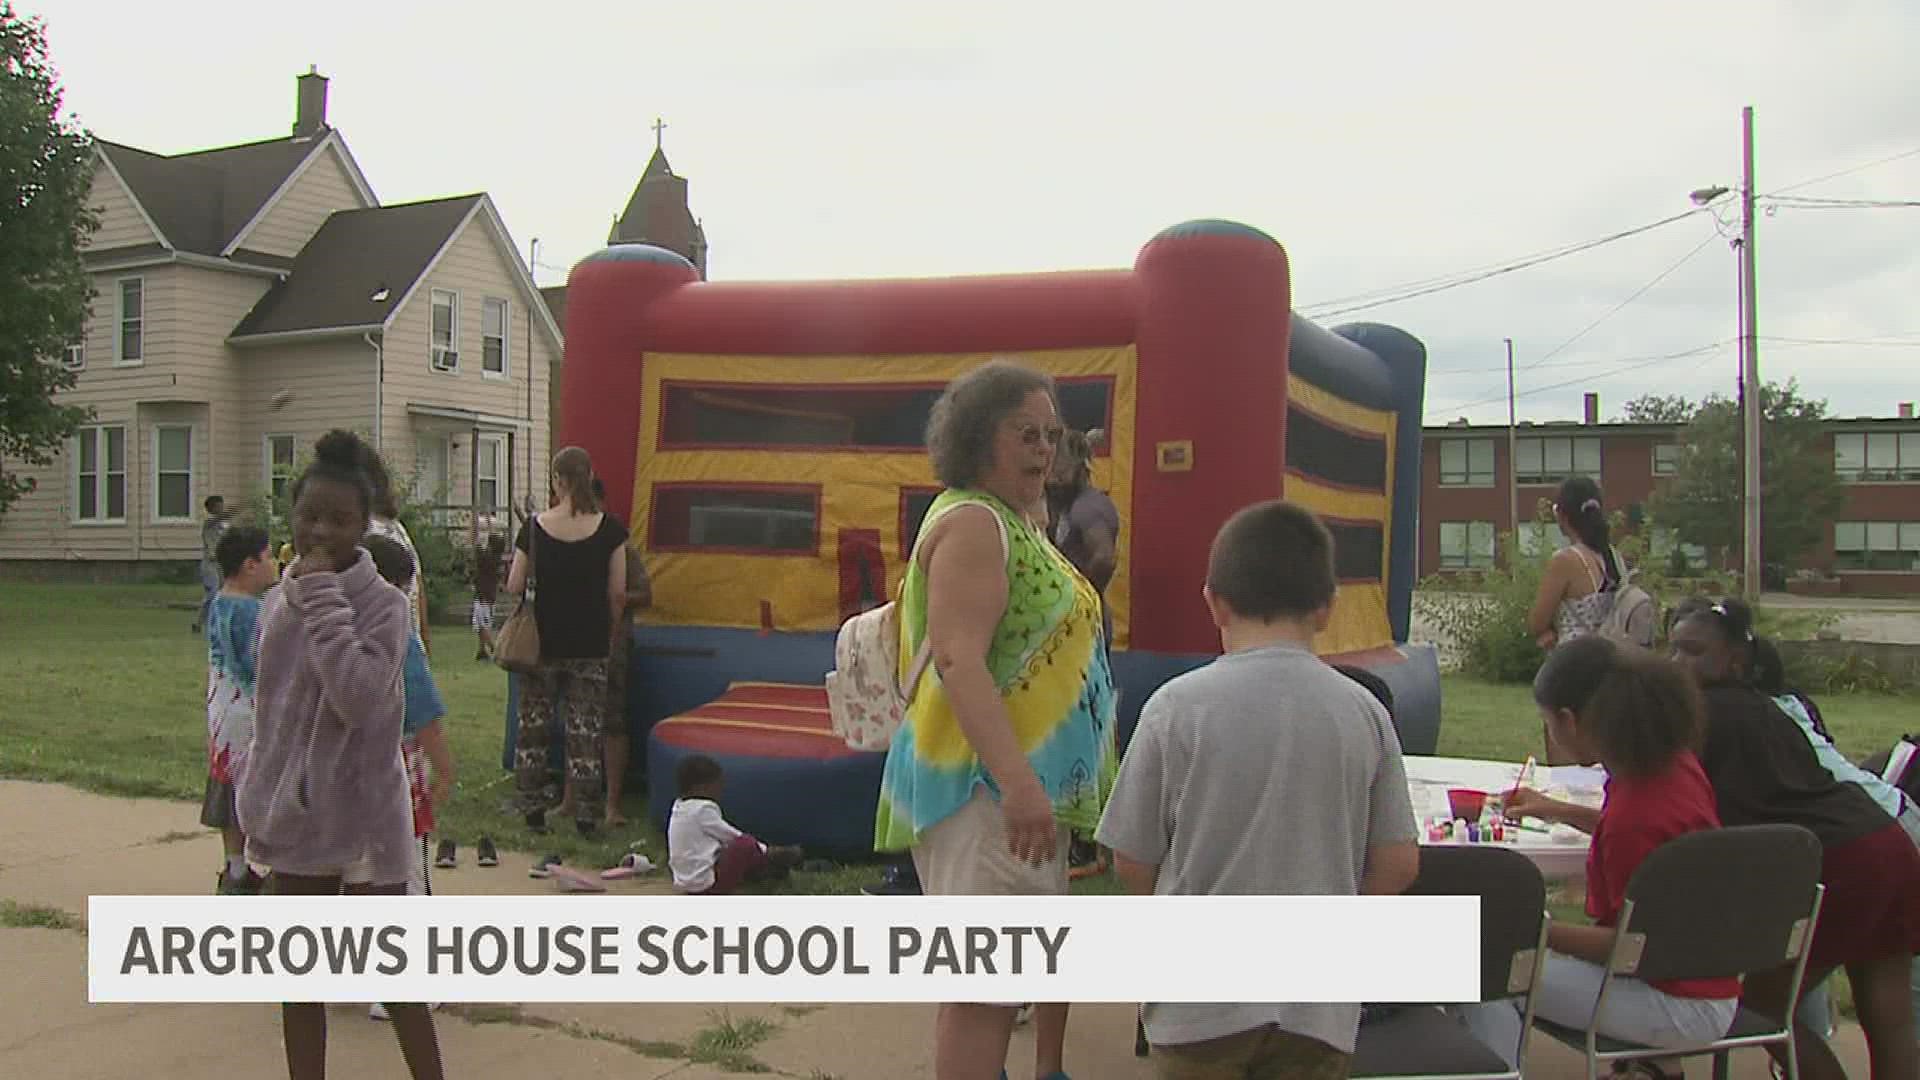 Everyone spent time celebrating the upcoming school year with face painting, music and a bounce house.